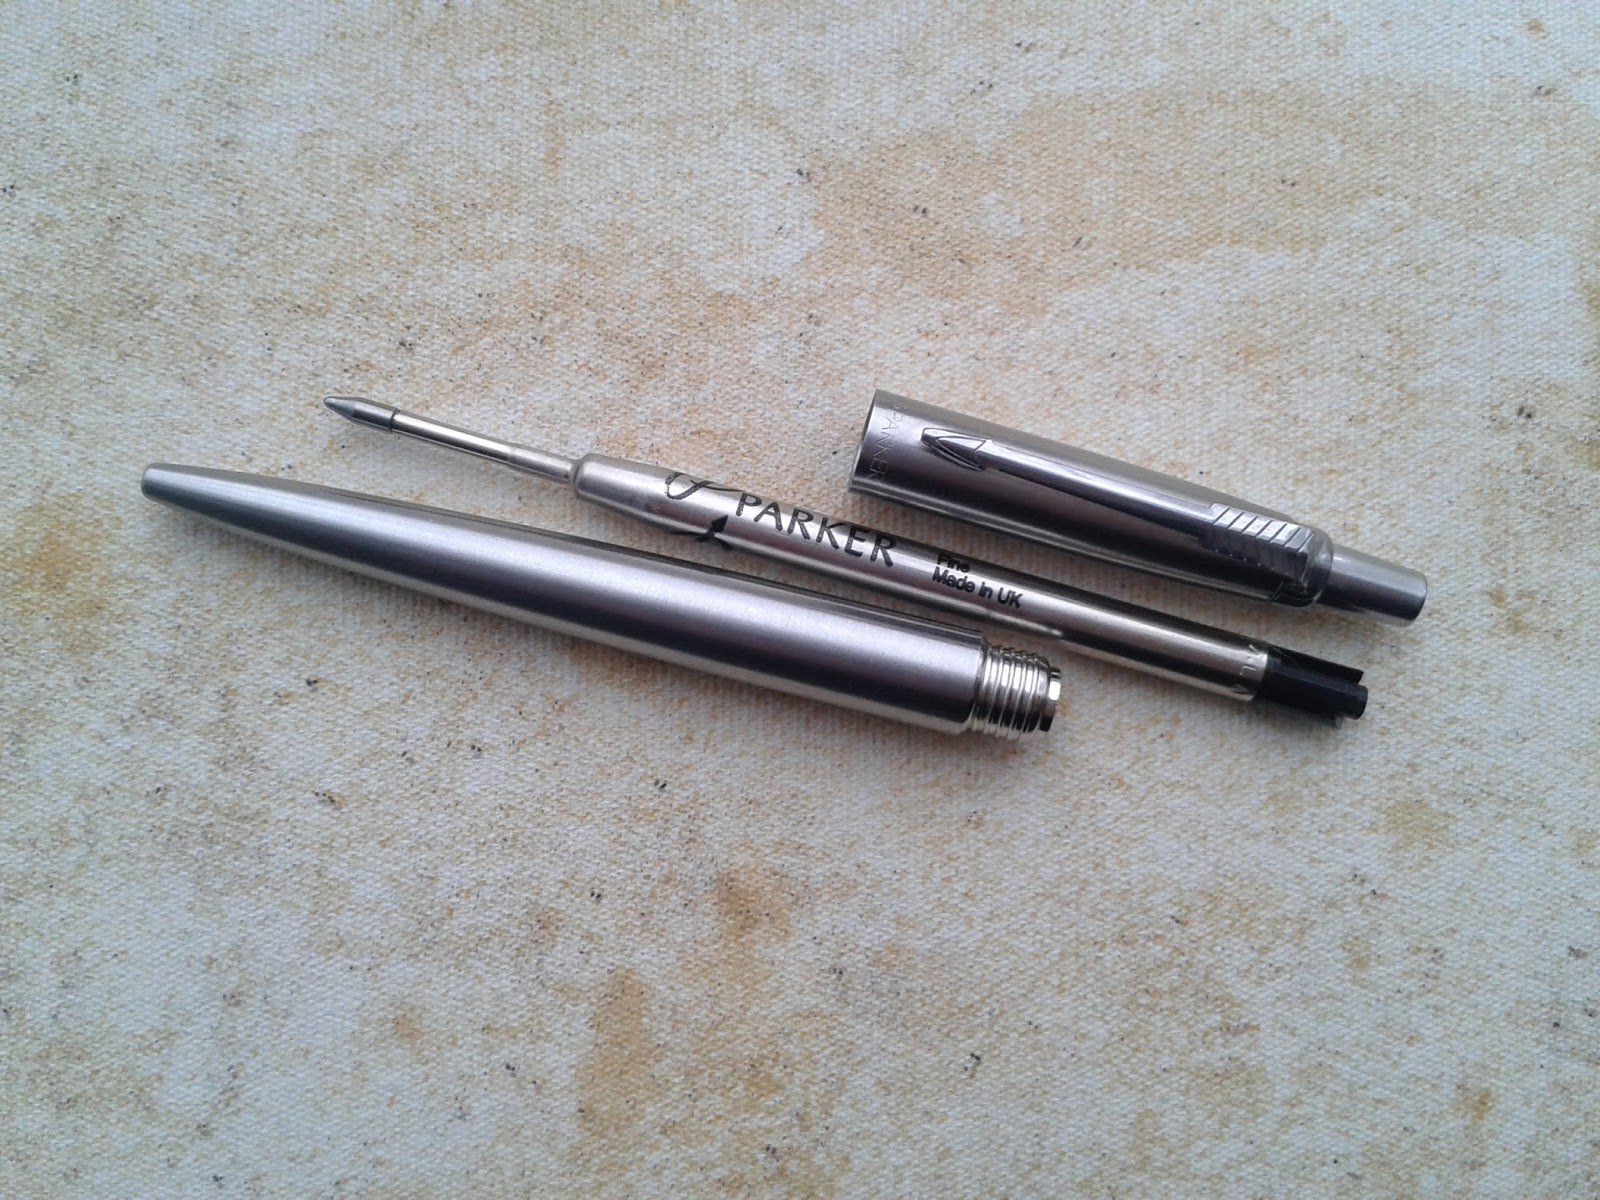 Jotter Pen - Per My Last Email – Duly Noted Stationery